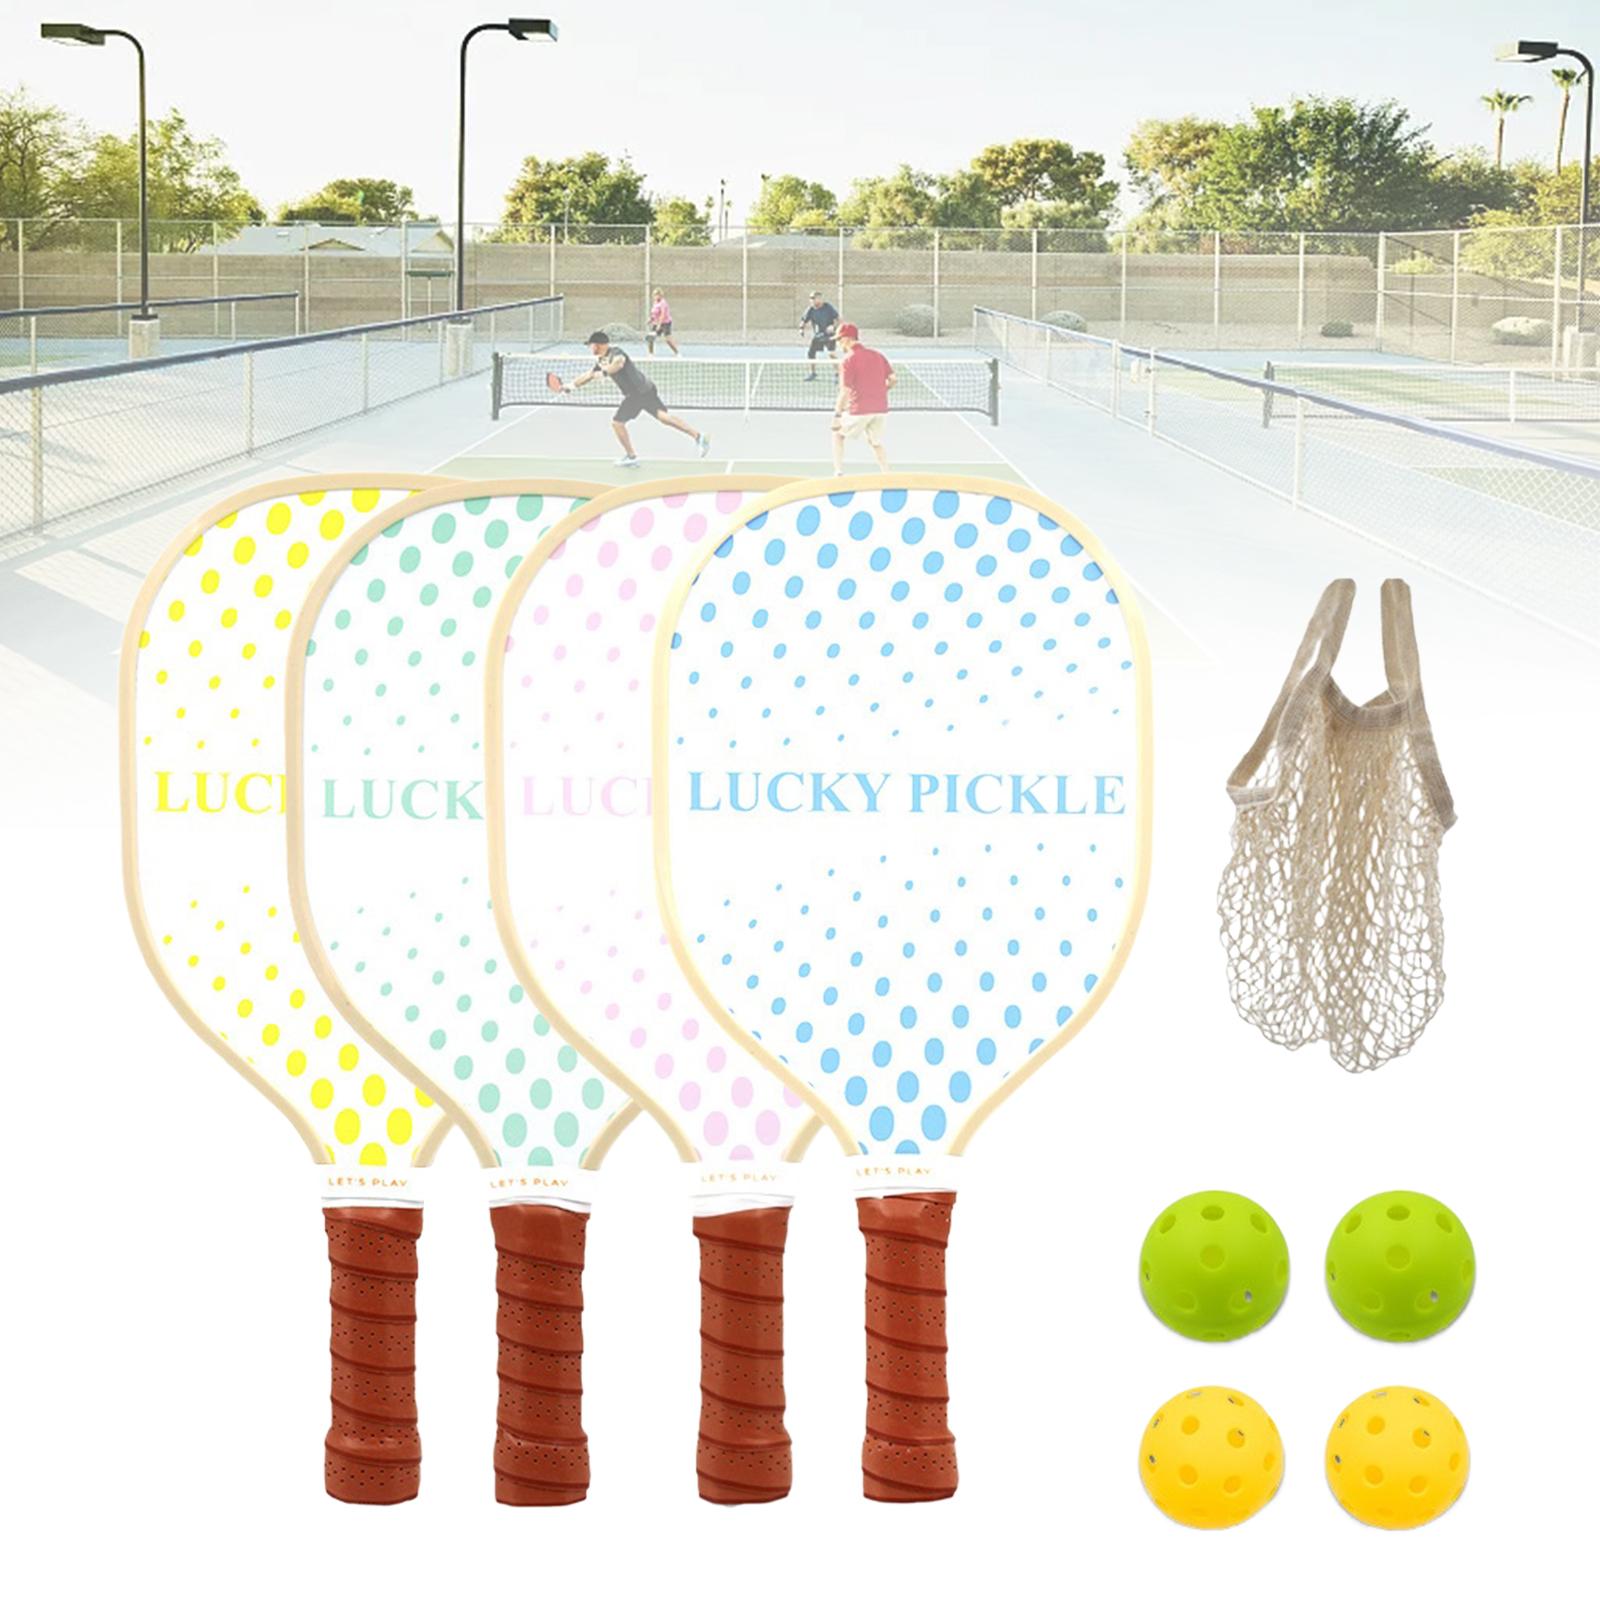 4x Wooden Pickleball Paddles Practical Portable Pickleball Rackets and Balls